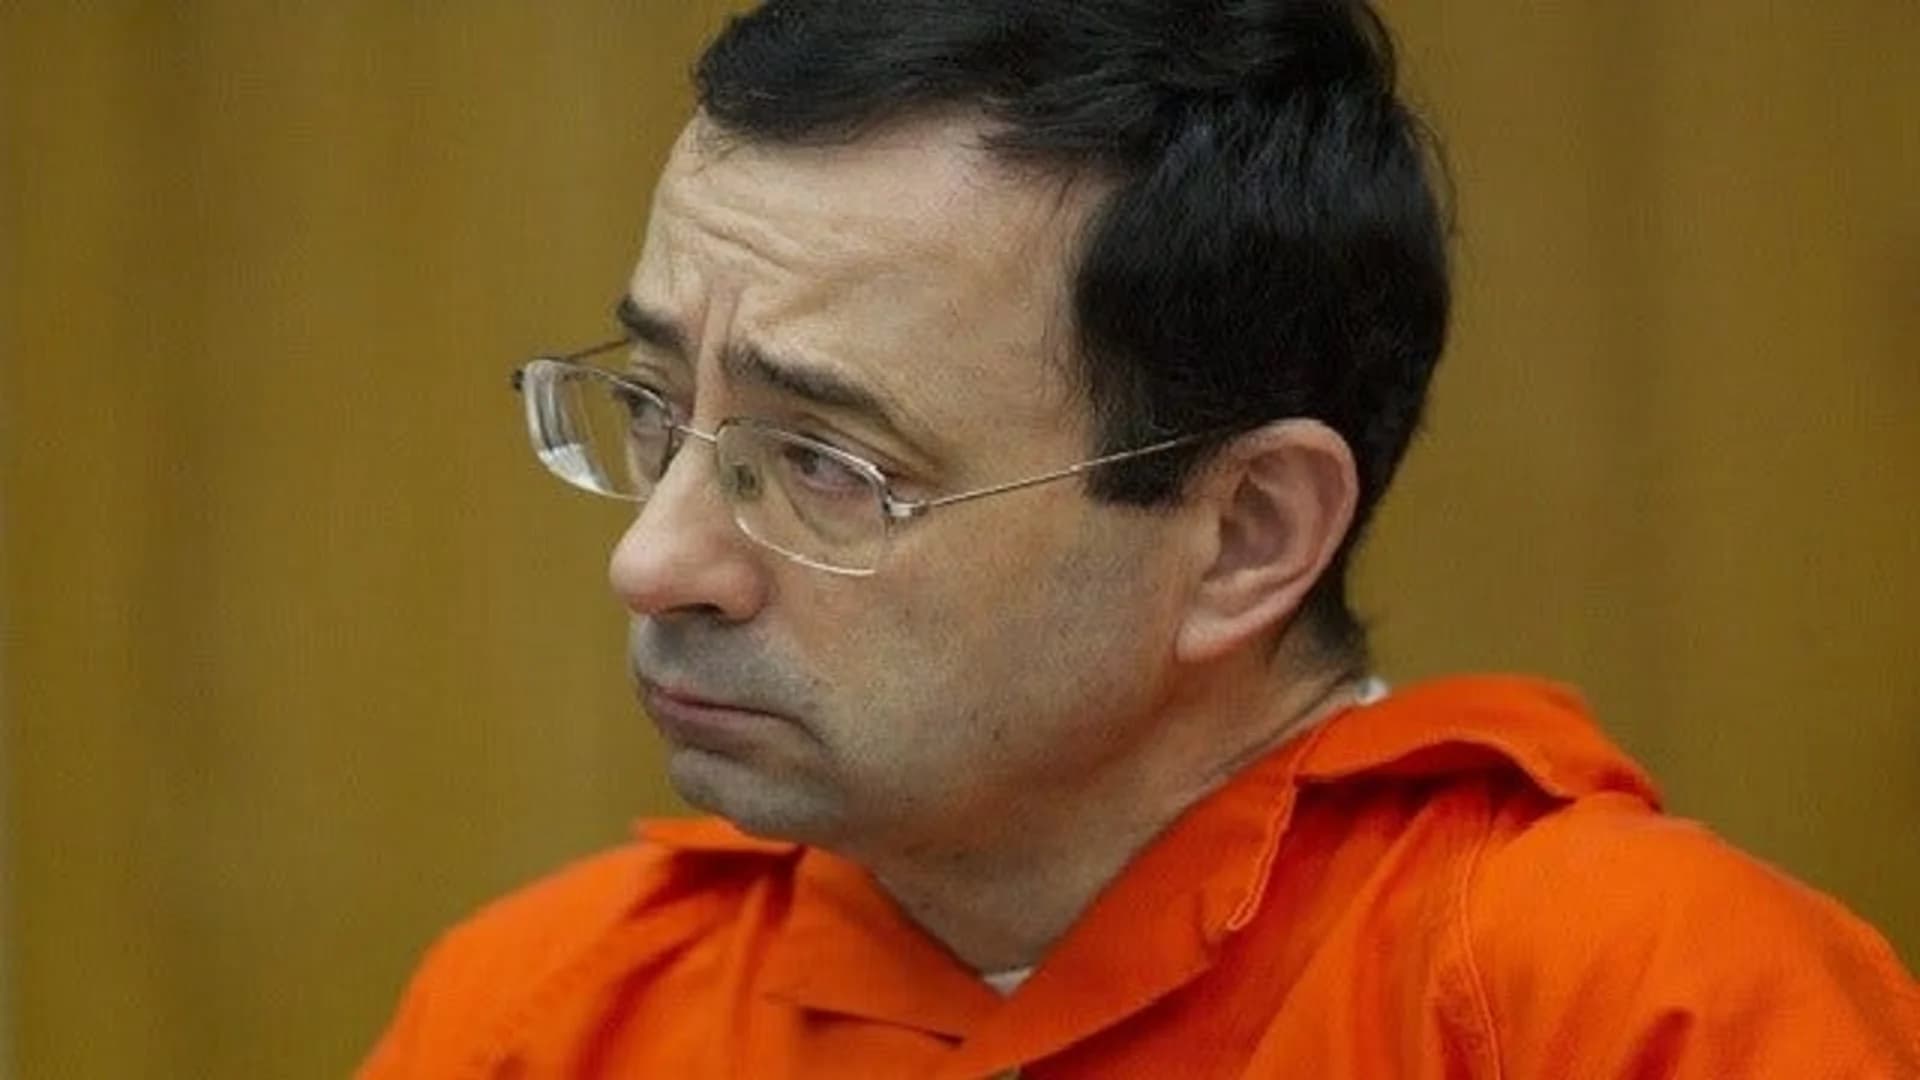 Victims’ father: I’m sorry for trying to attack Larry Nassar